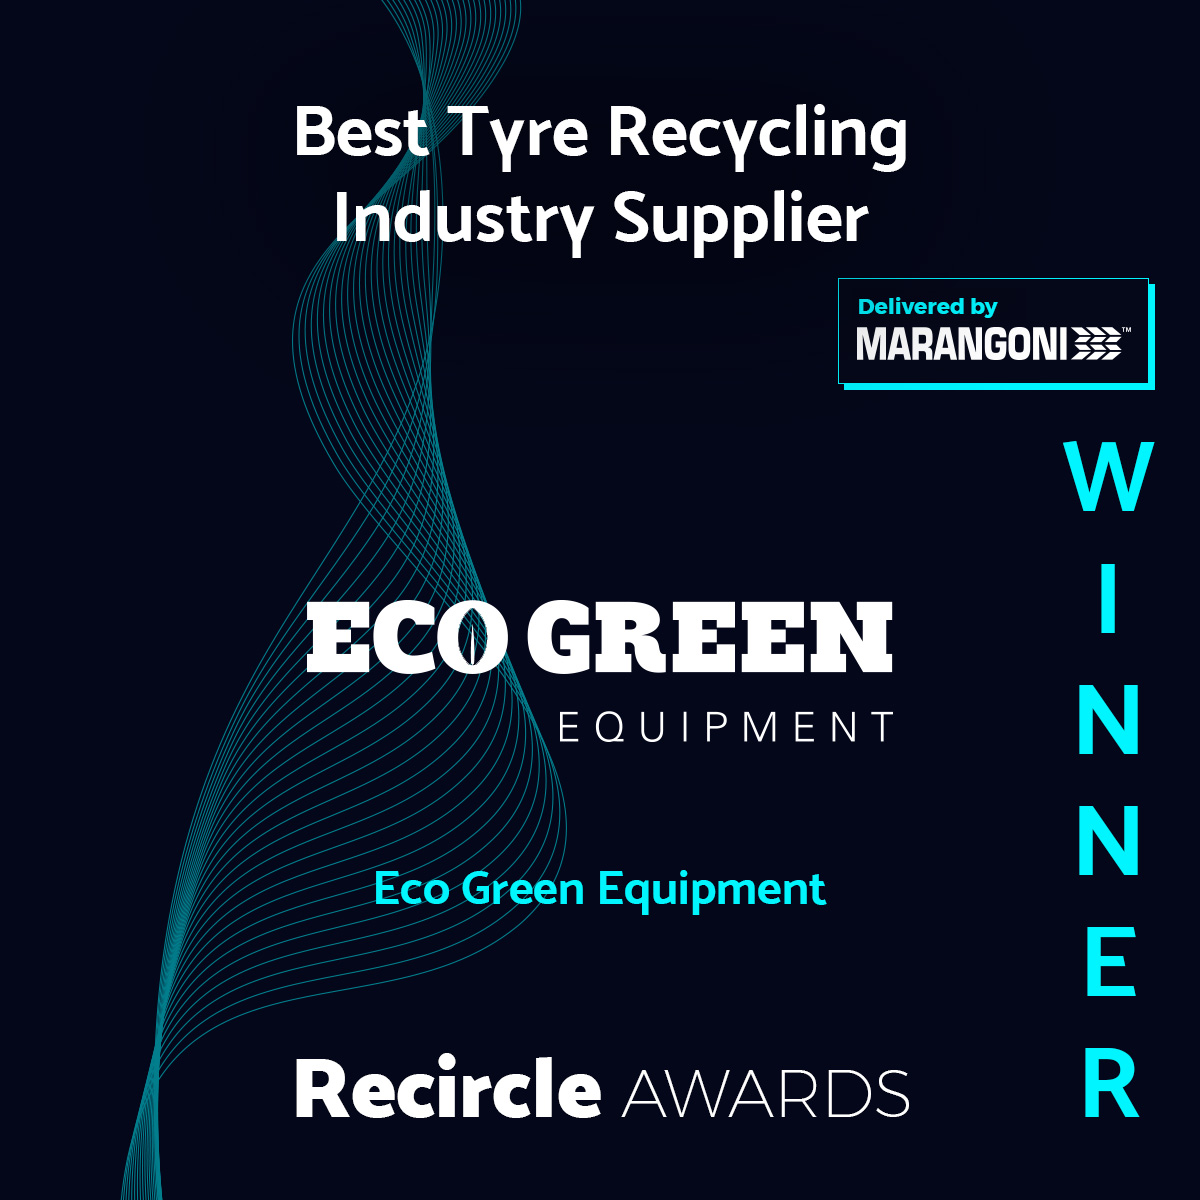 Best Tyre Recycling Industry Supplier 21